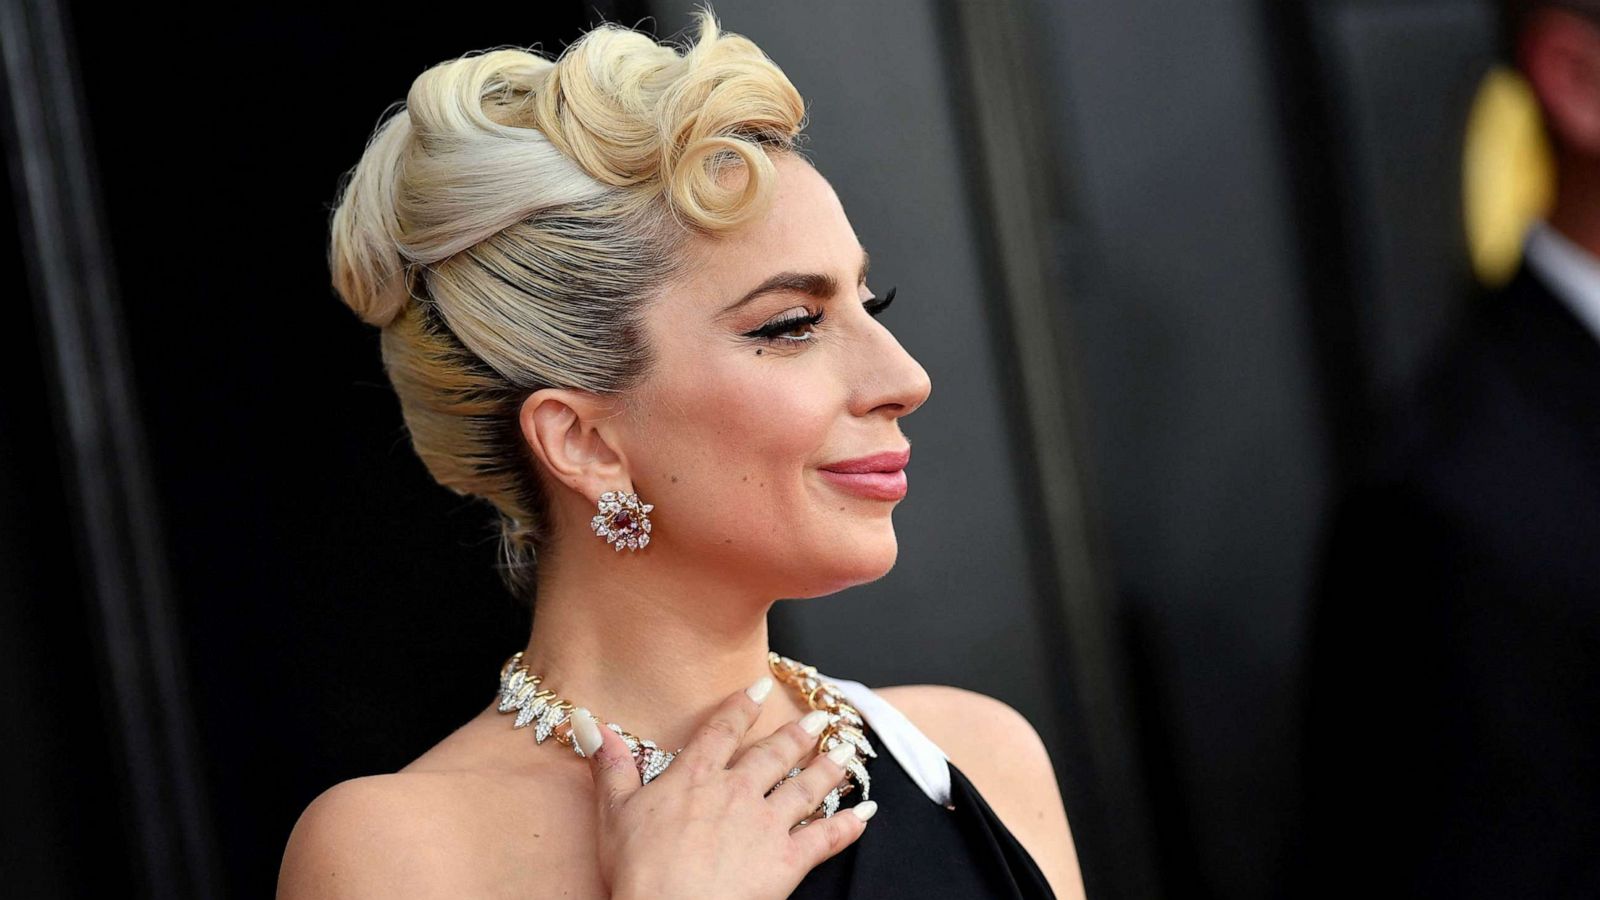 Lady Gaga won't perform at 2023 Oscars. Here's why - Good Morning America